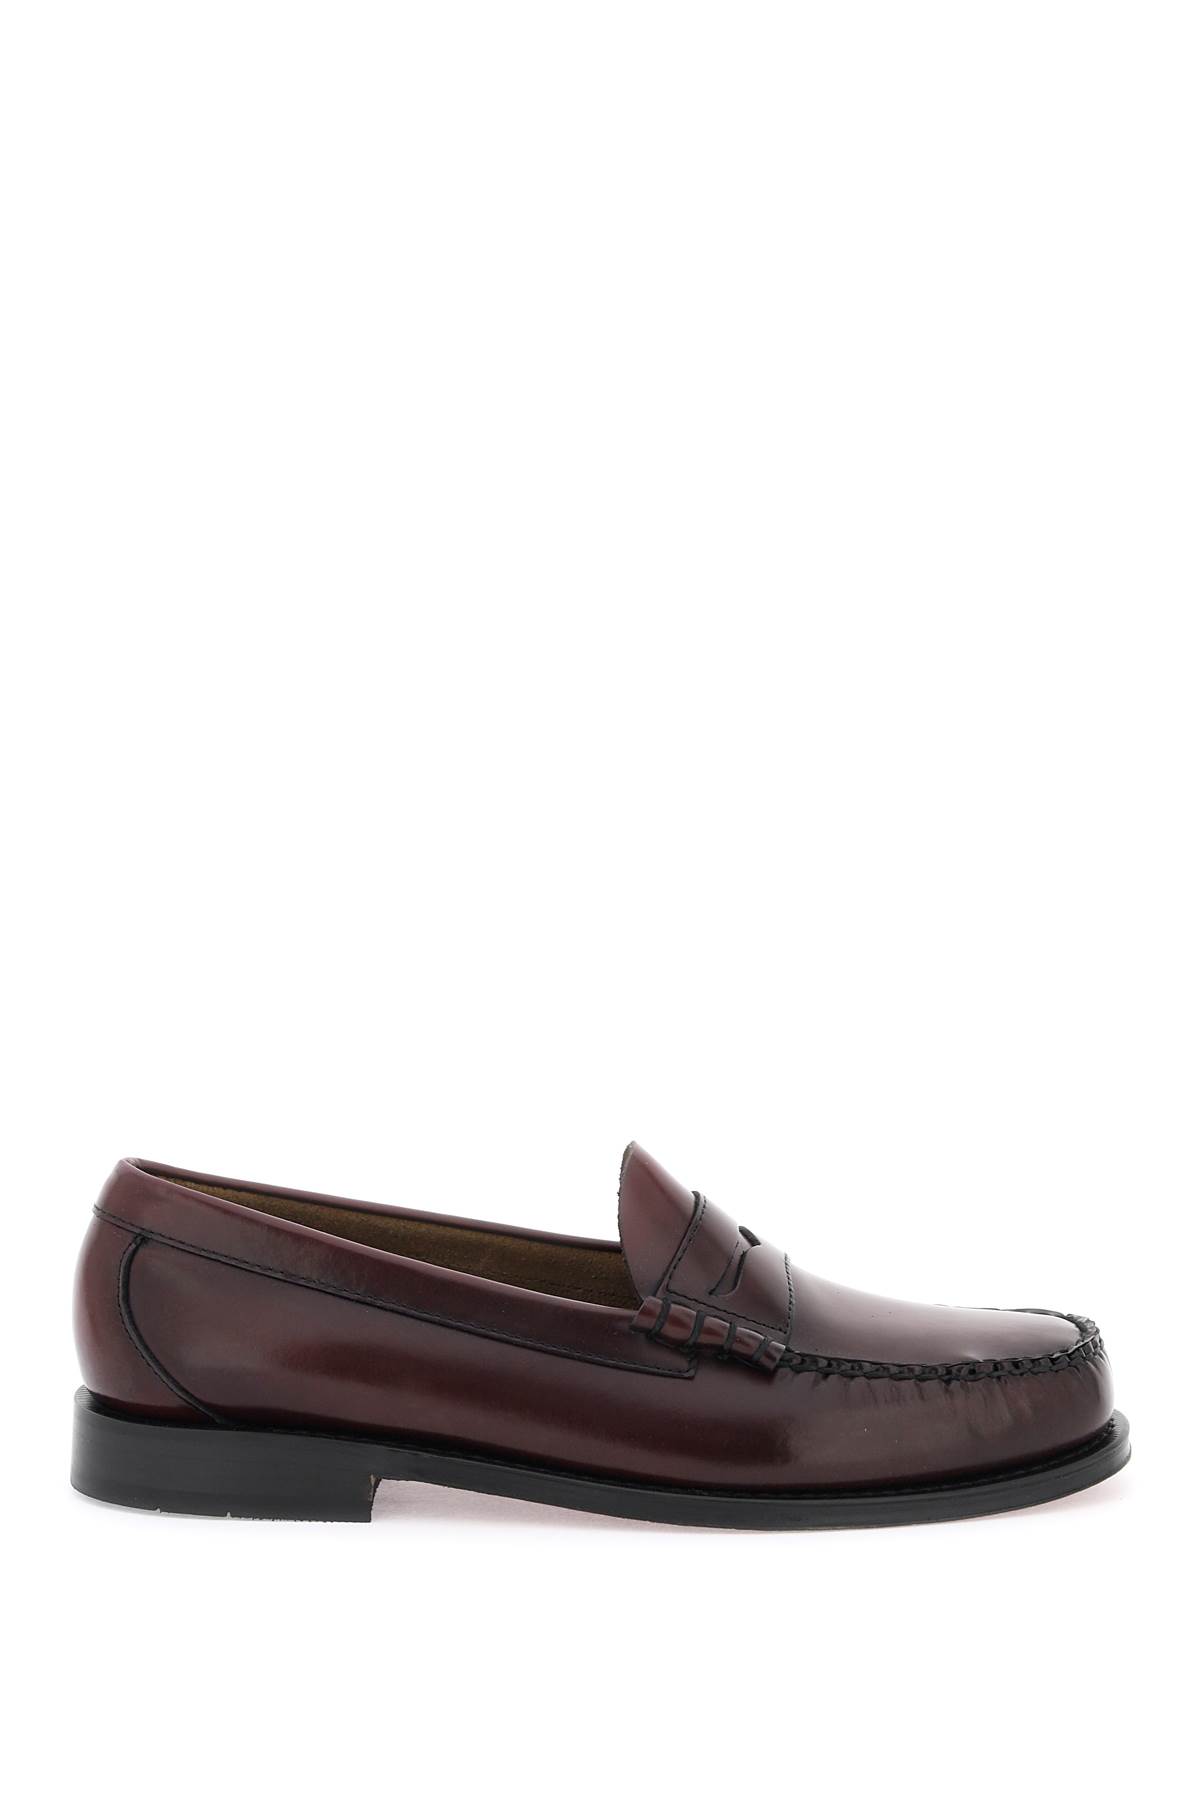 G.H.Bass & Co. weejuns Larson Penny Loafers